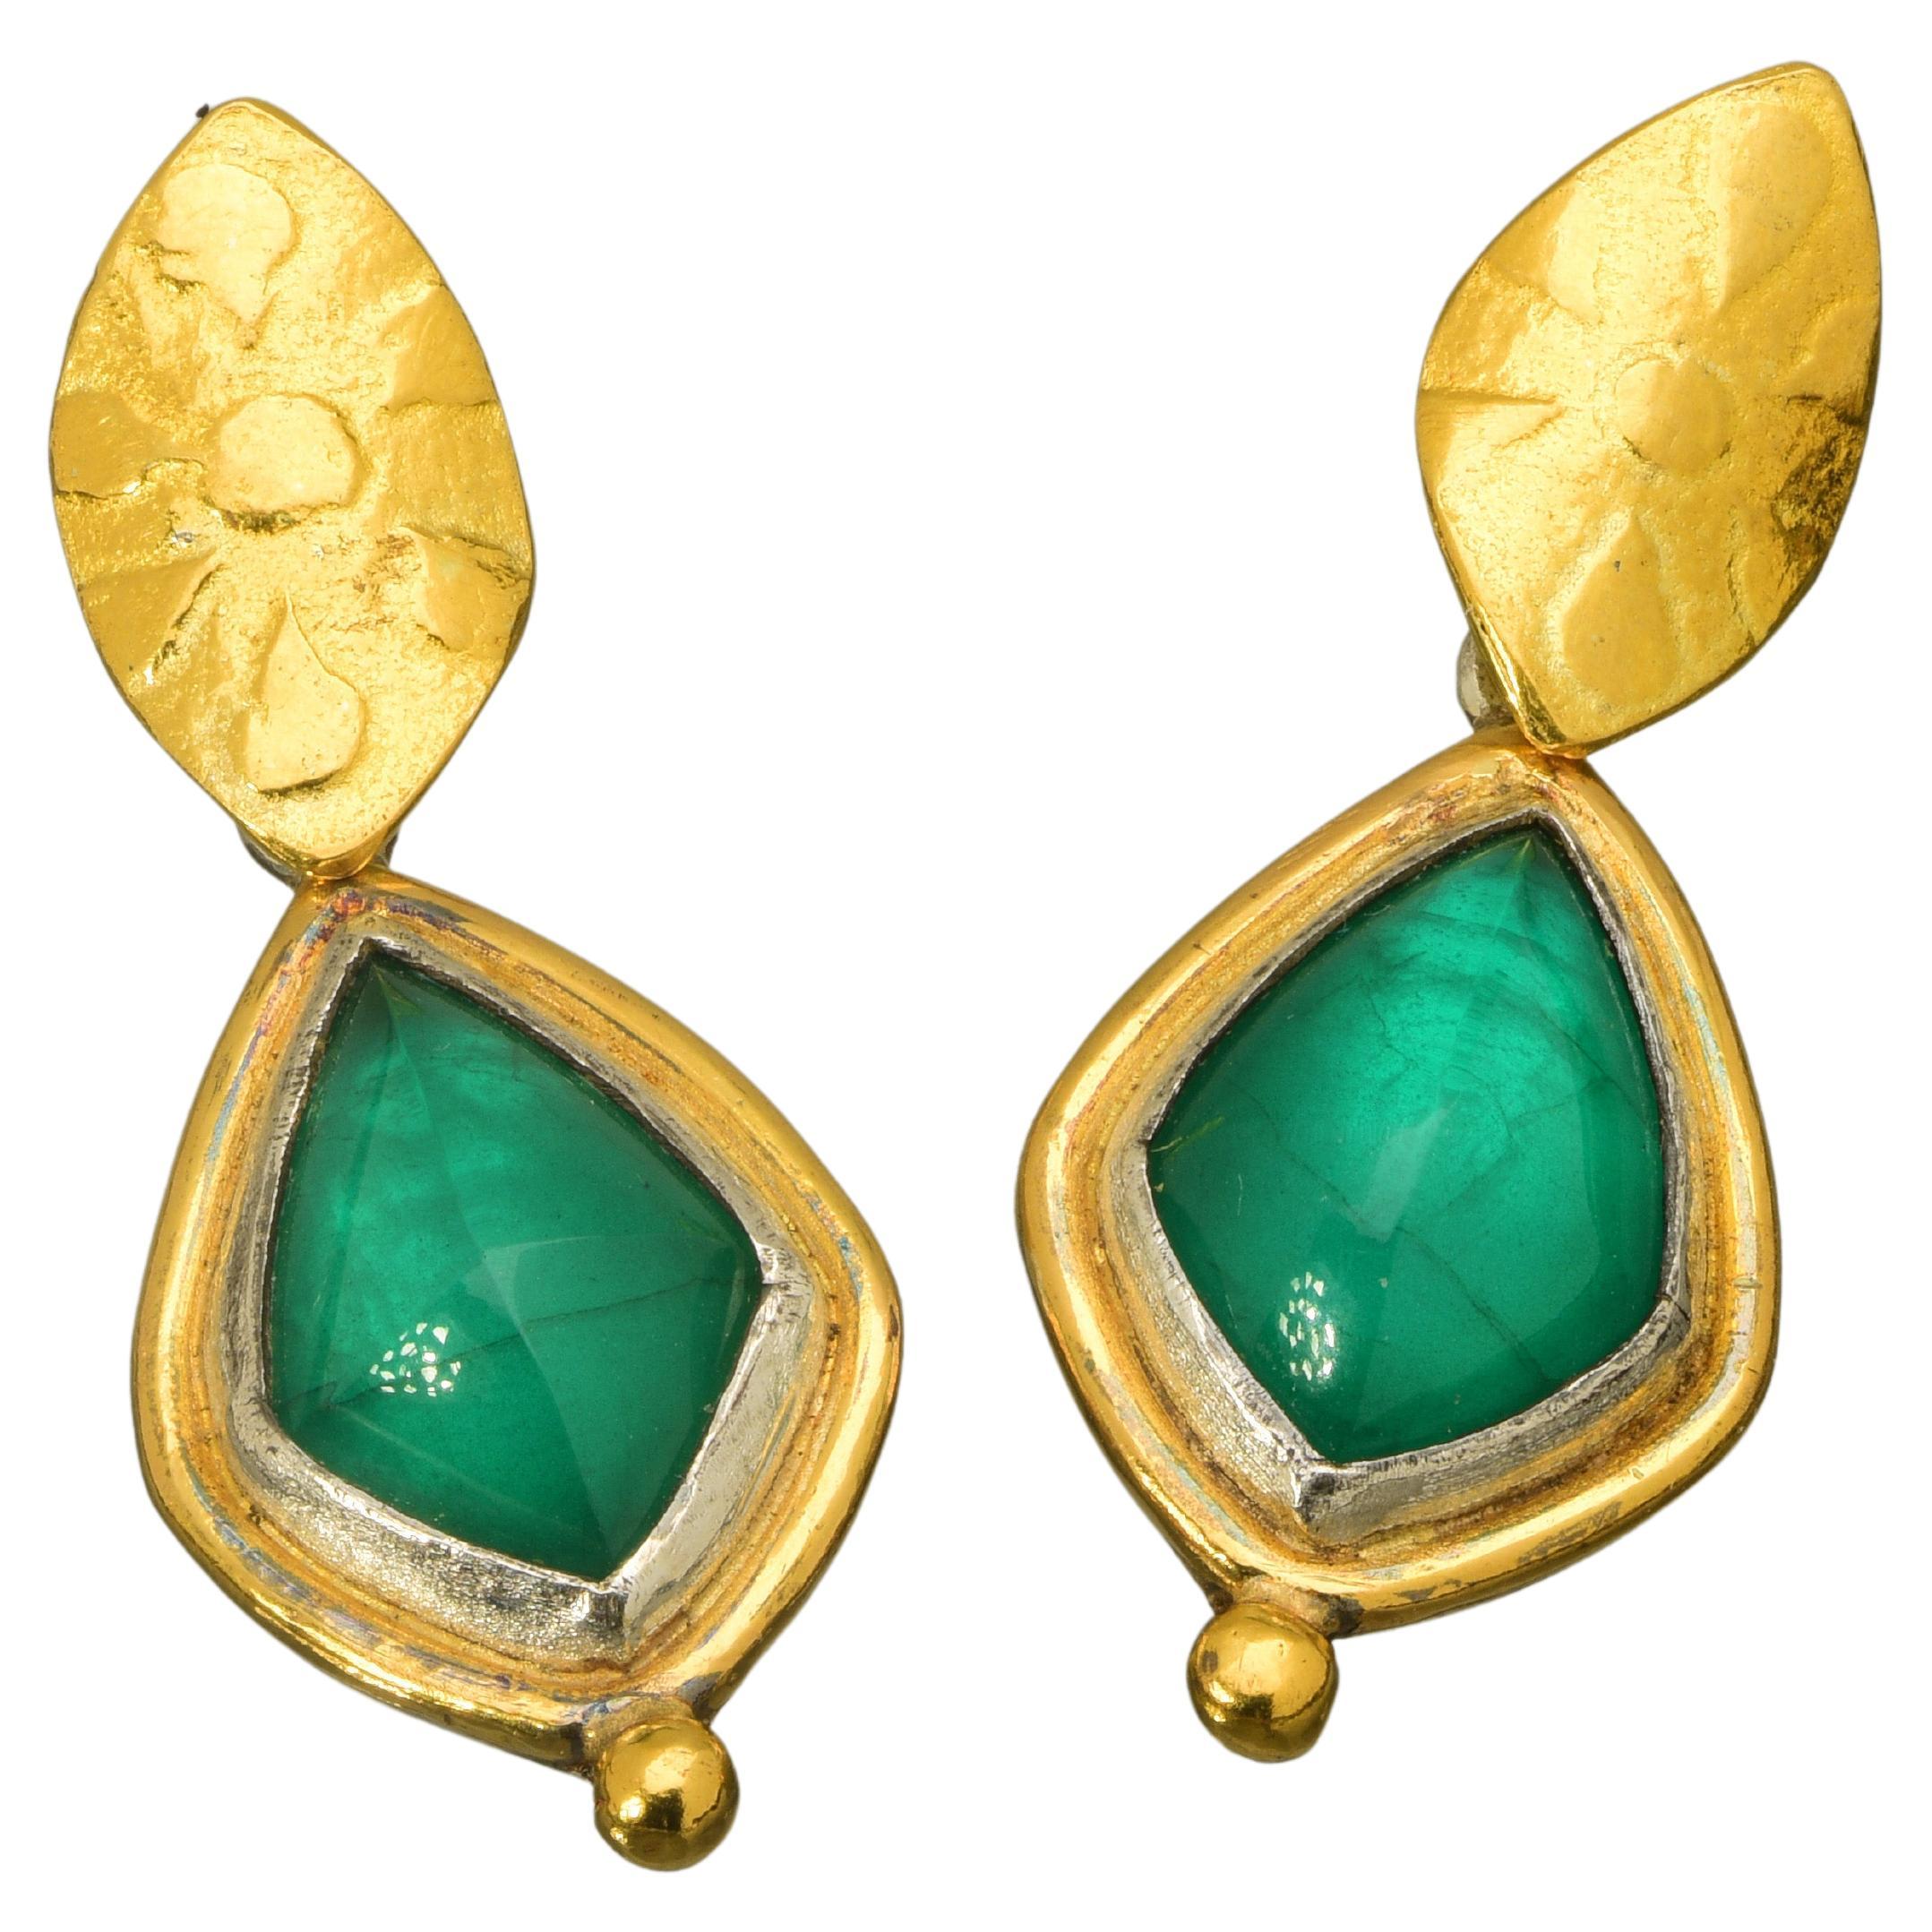 Emerald Earrings with 22 Karat Yellow Gold and Silver